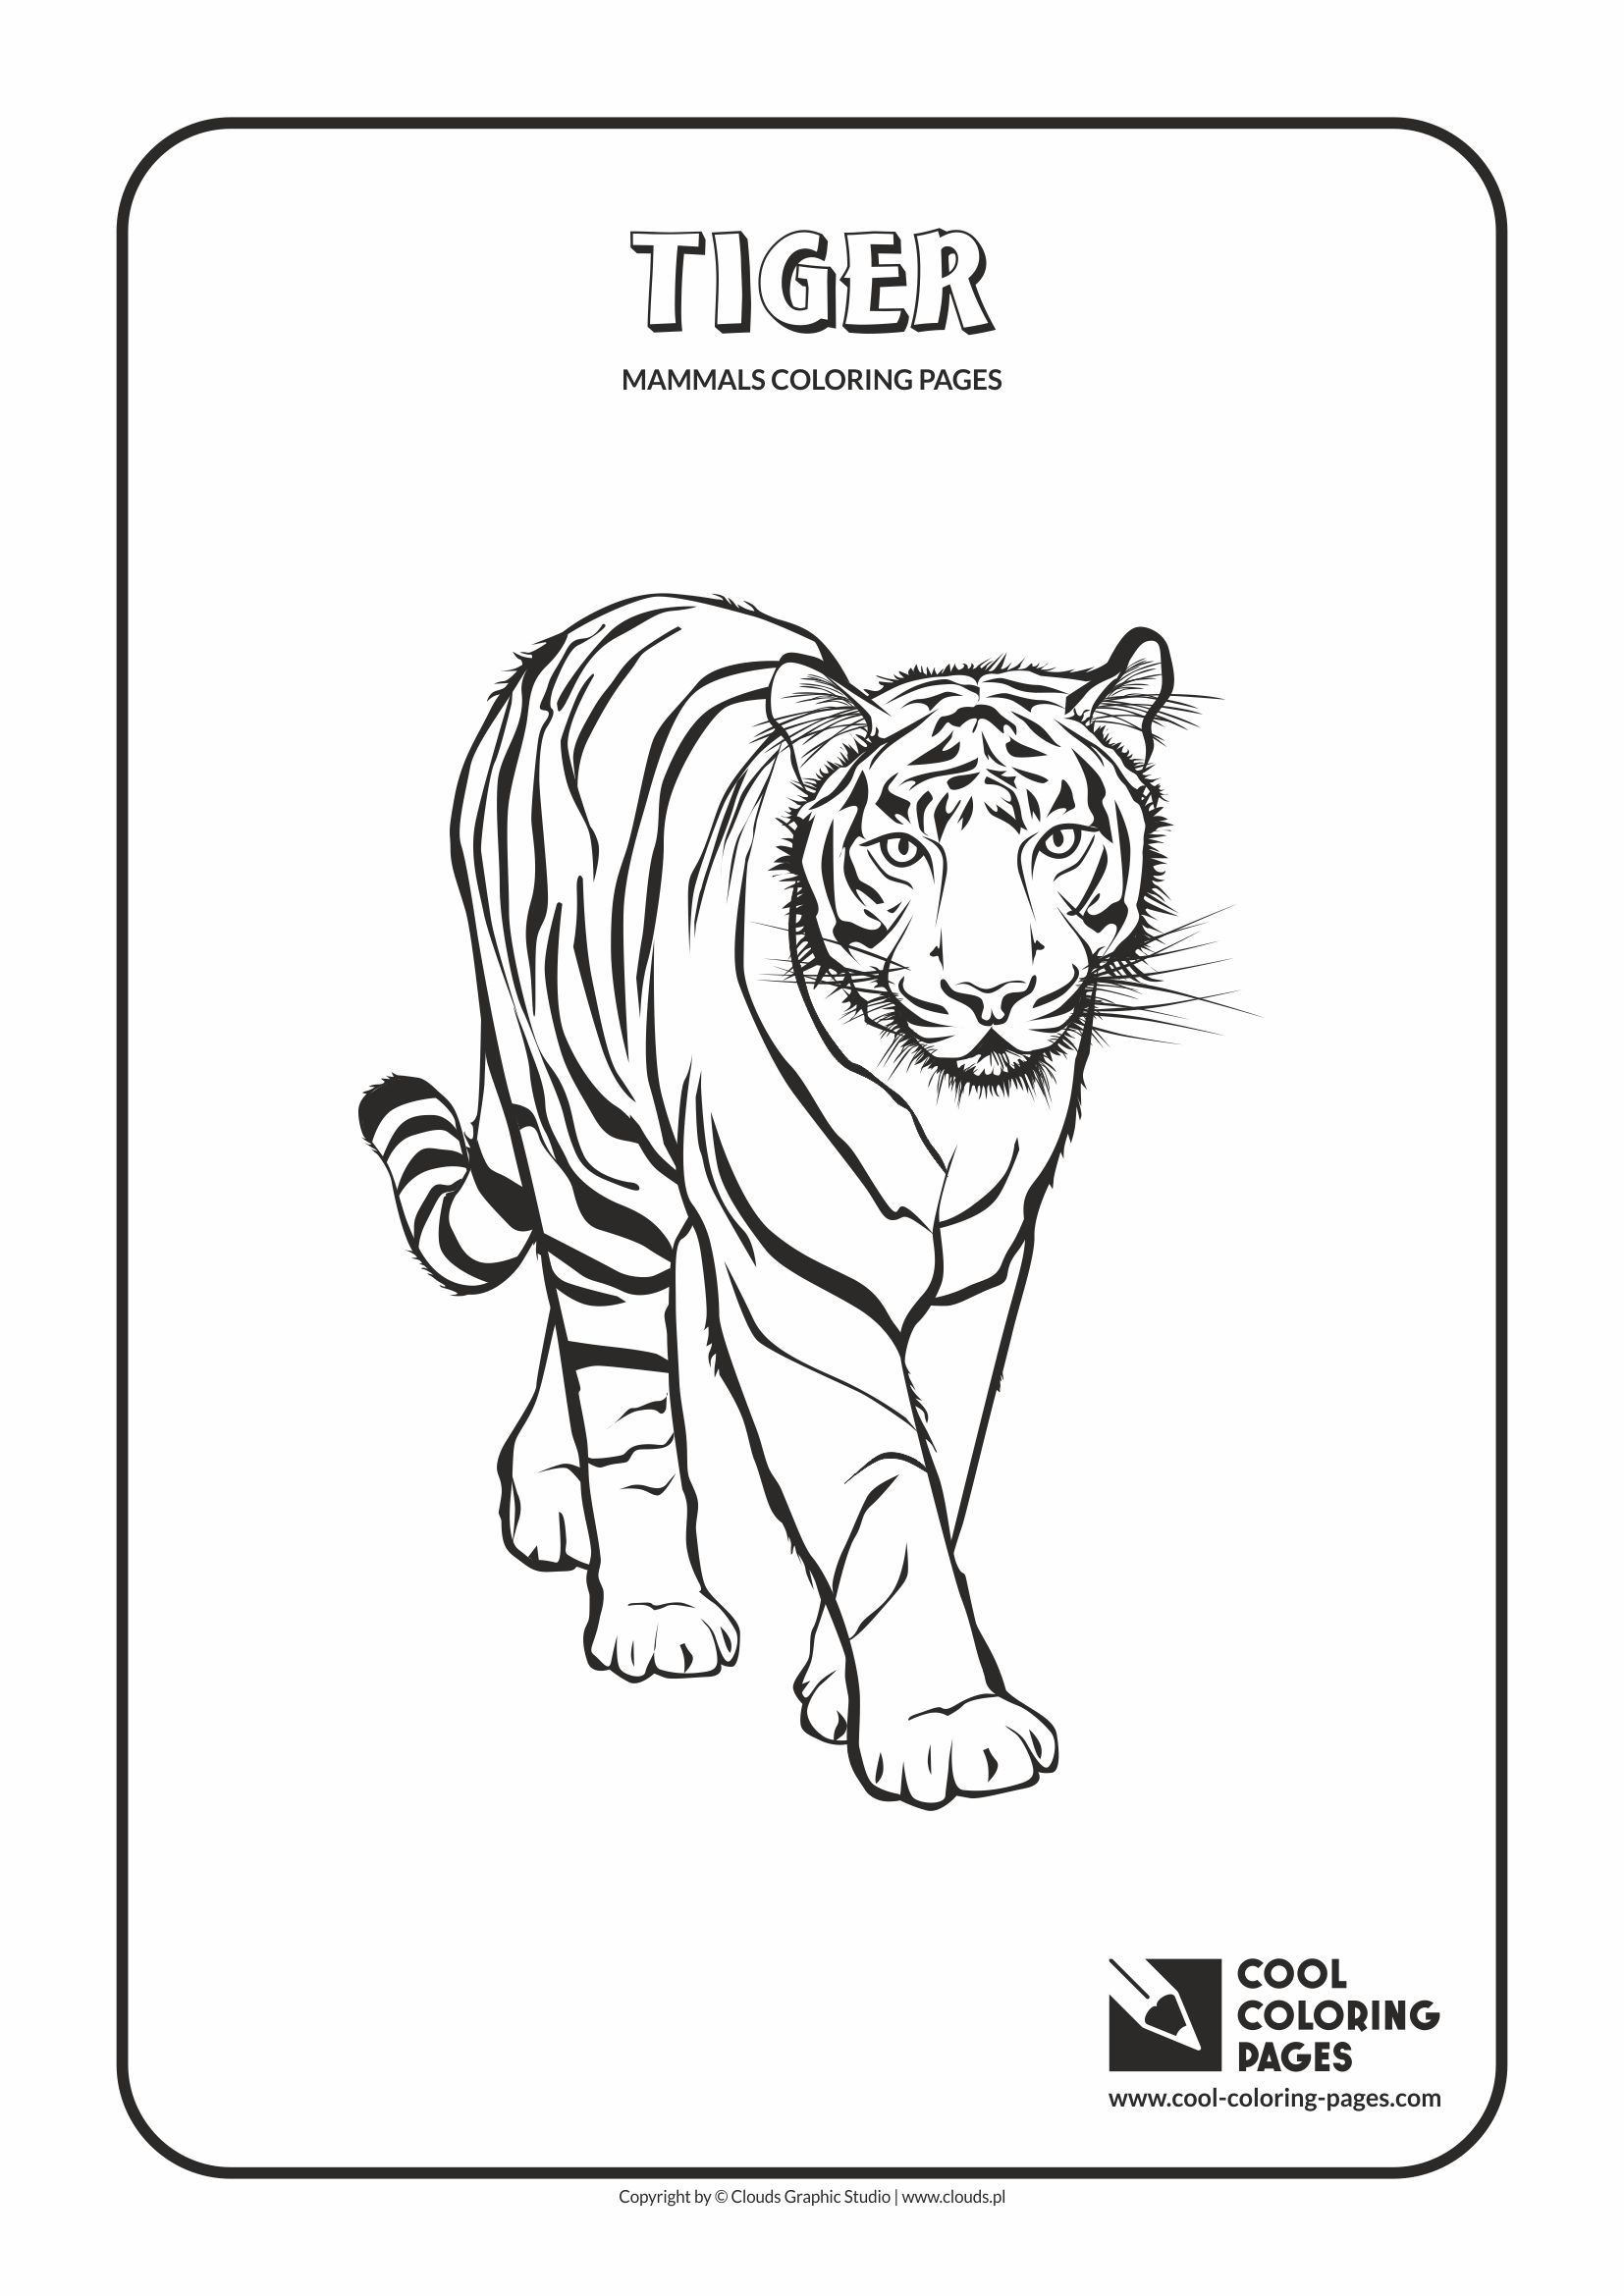 Cool coloring pages mammals coloring pages